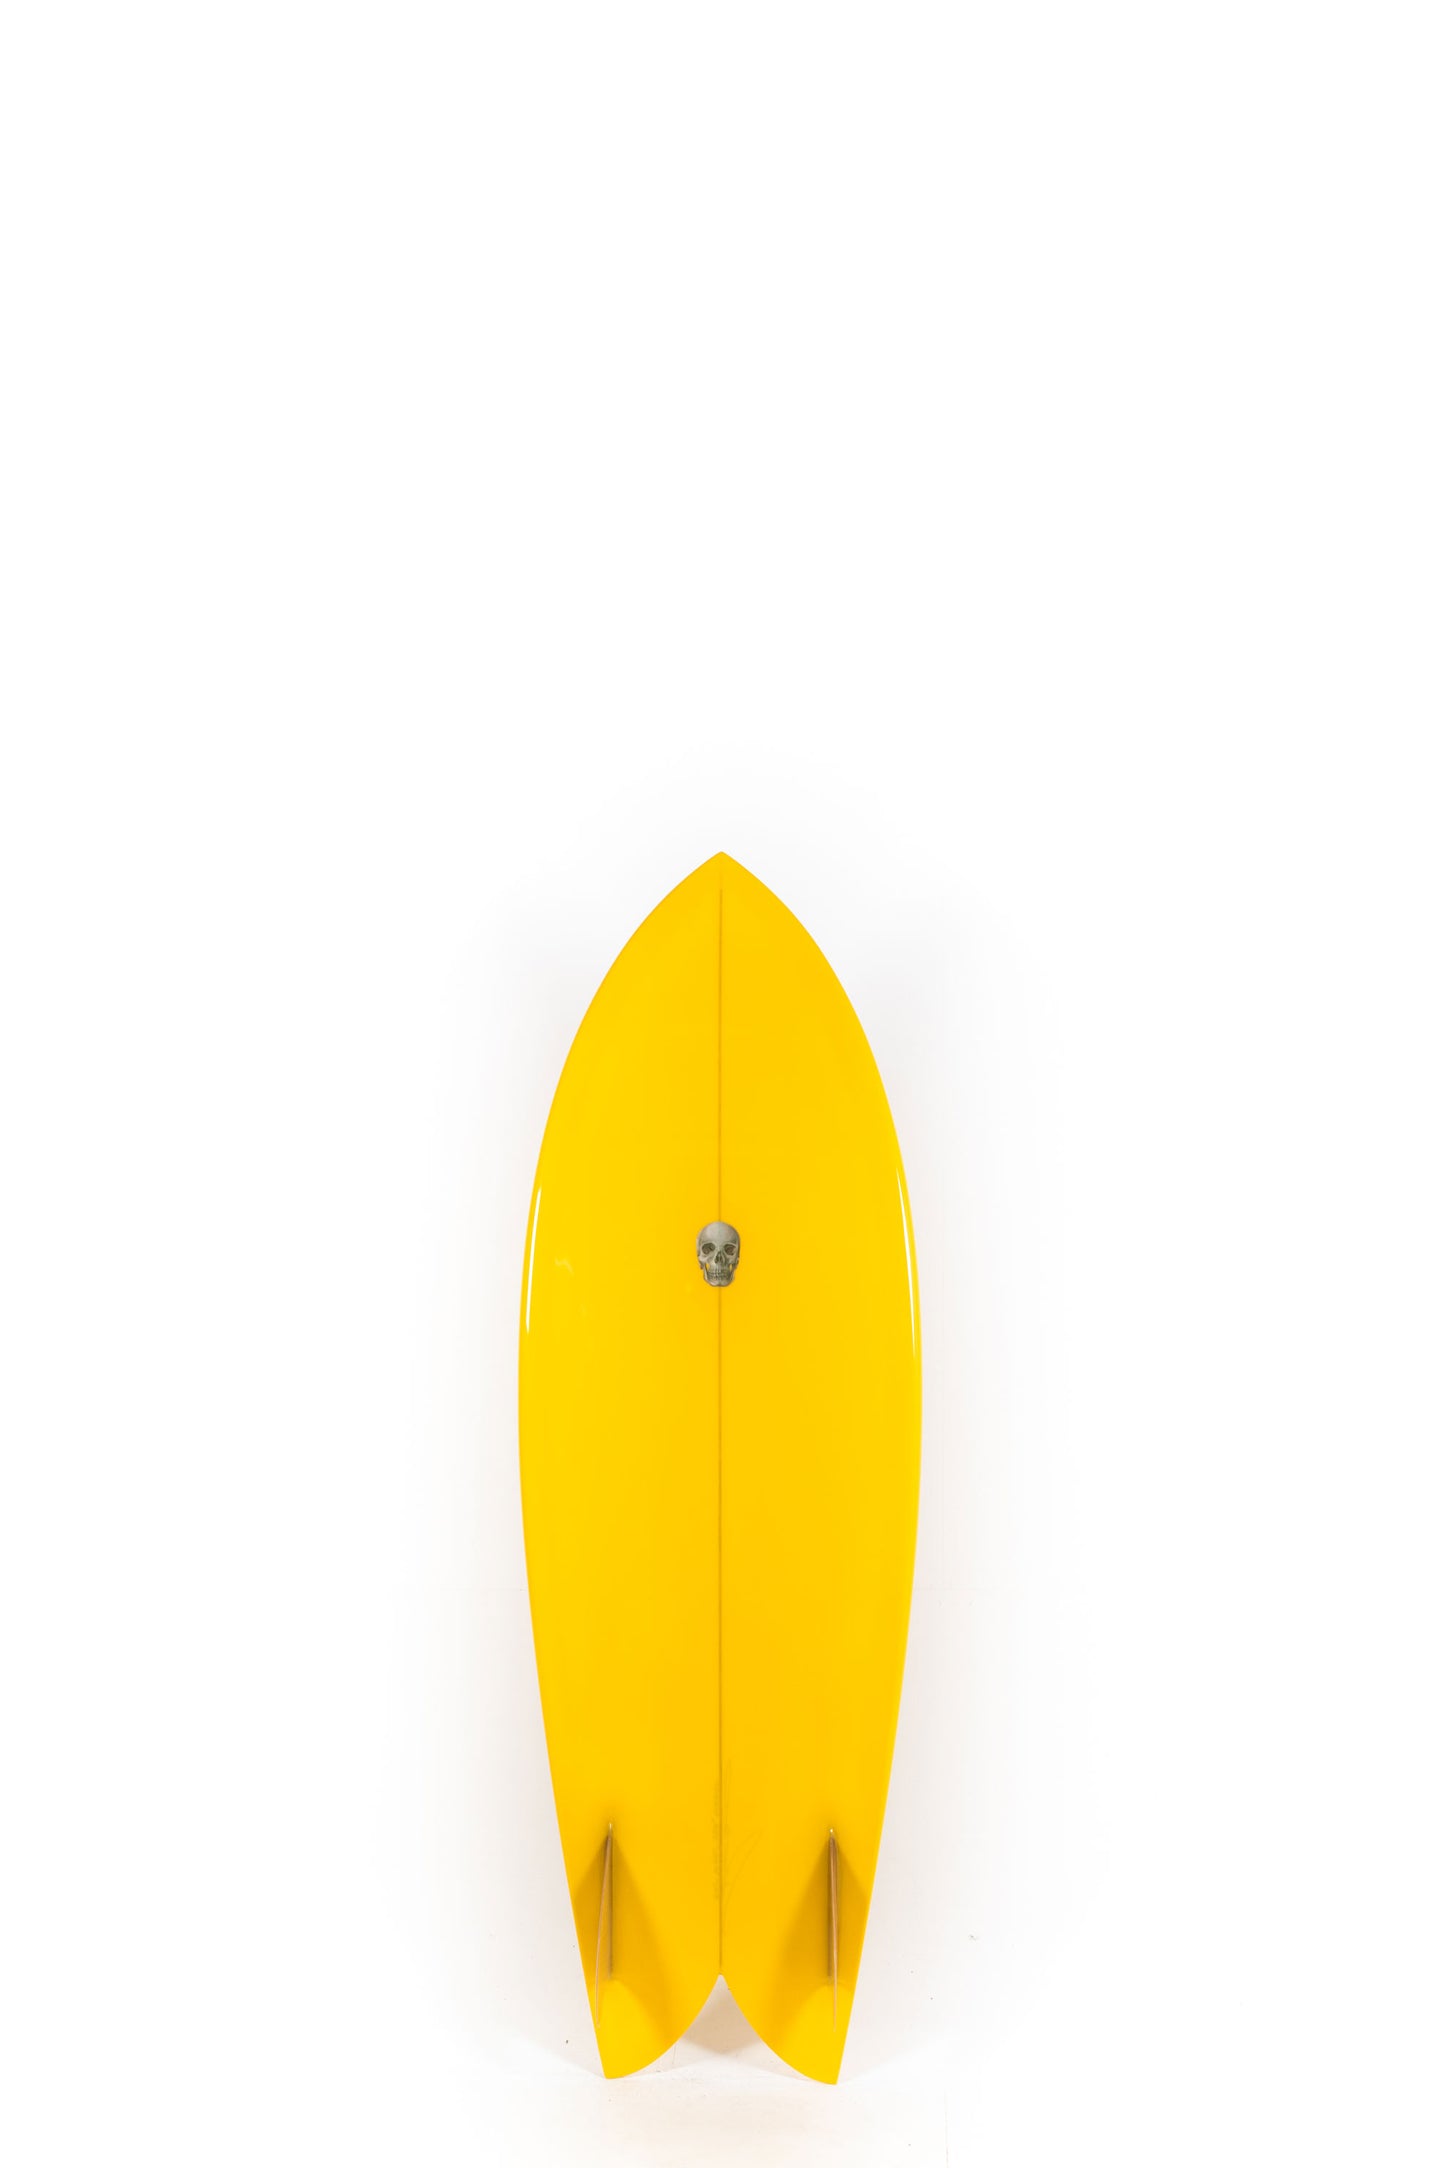 CHRISTENSON SURFBOARDS | Available online at PUKAS SURF SHOP – Page 2